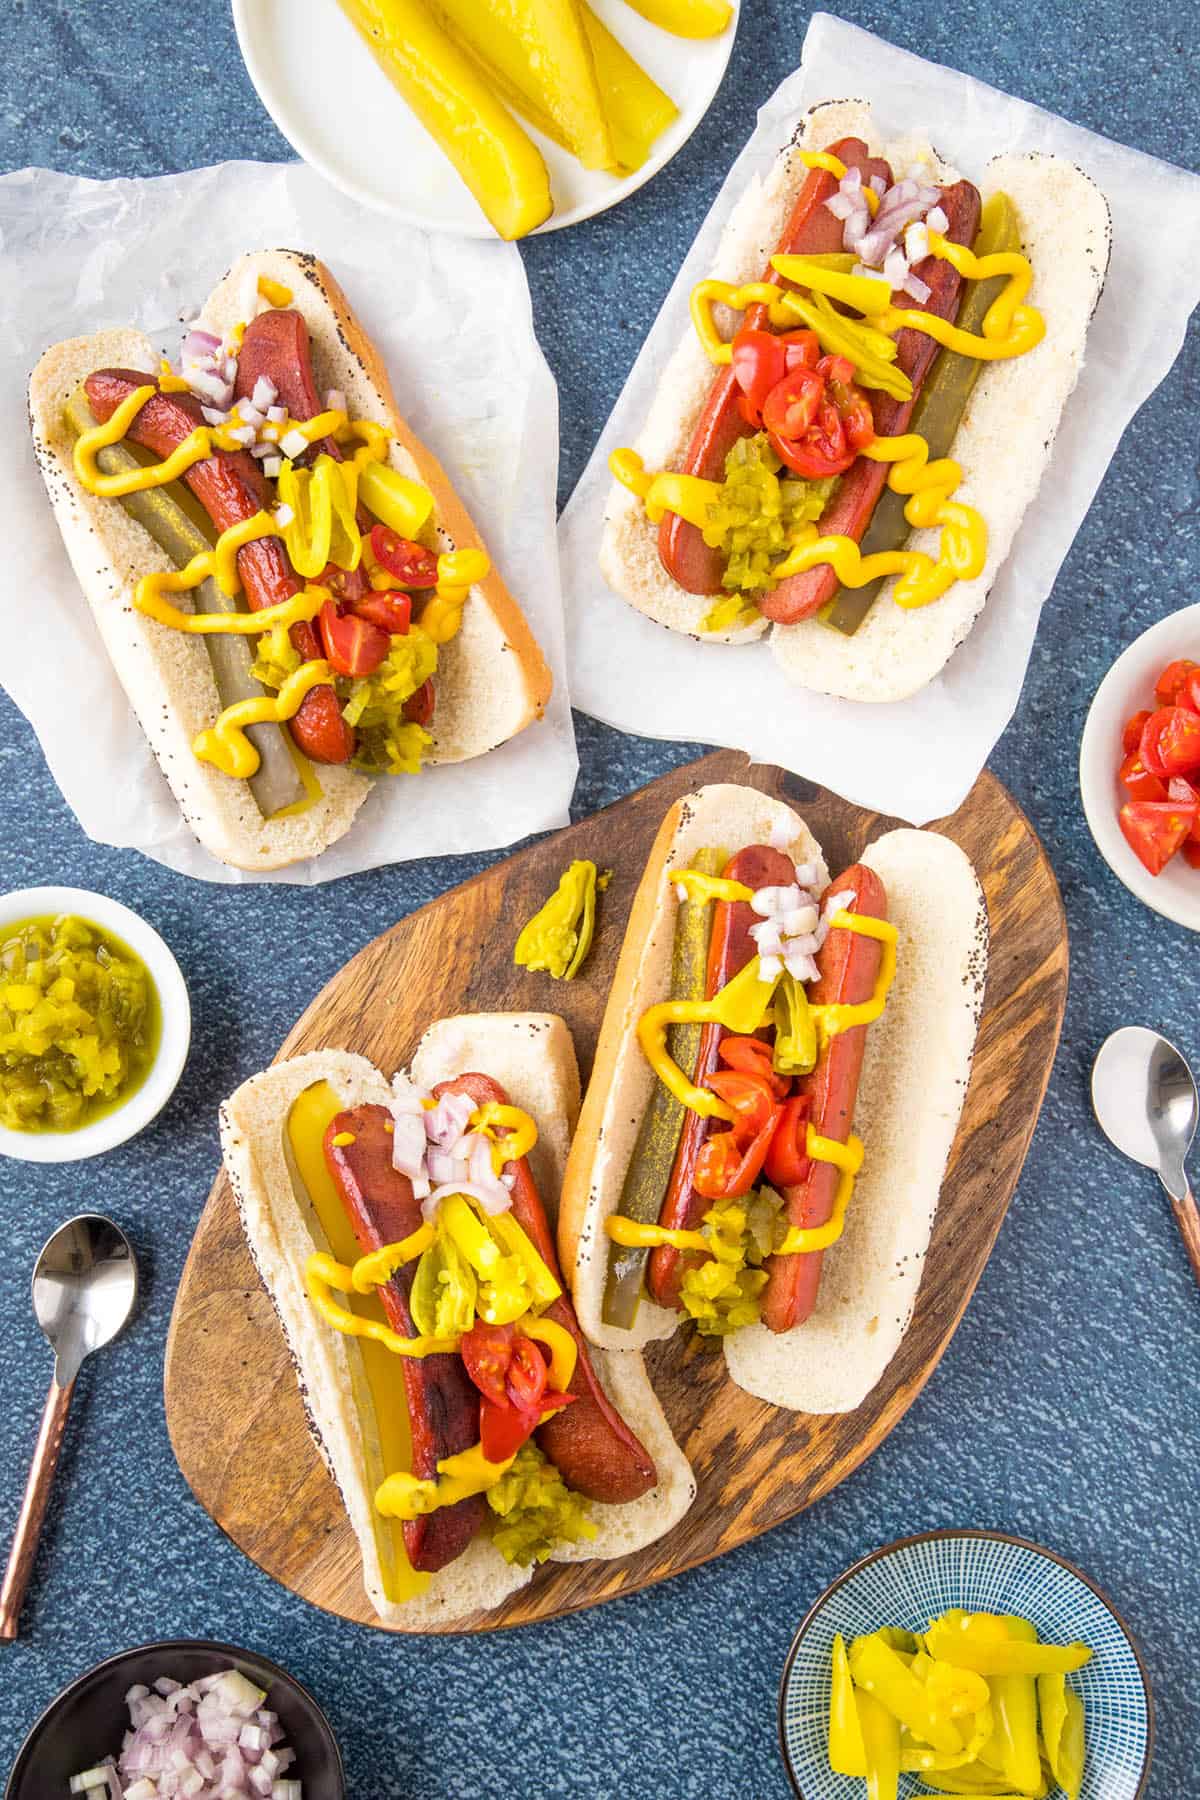 Chicago Style Hot Dogs with loads of mustard